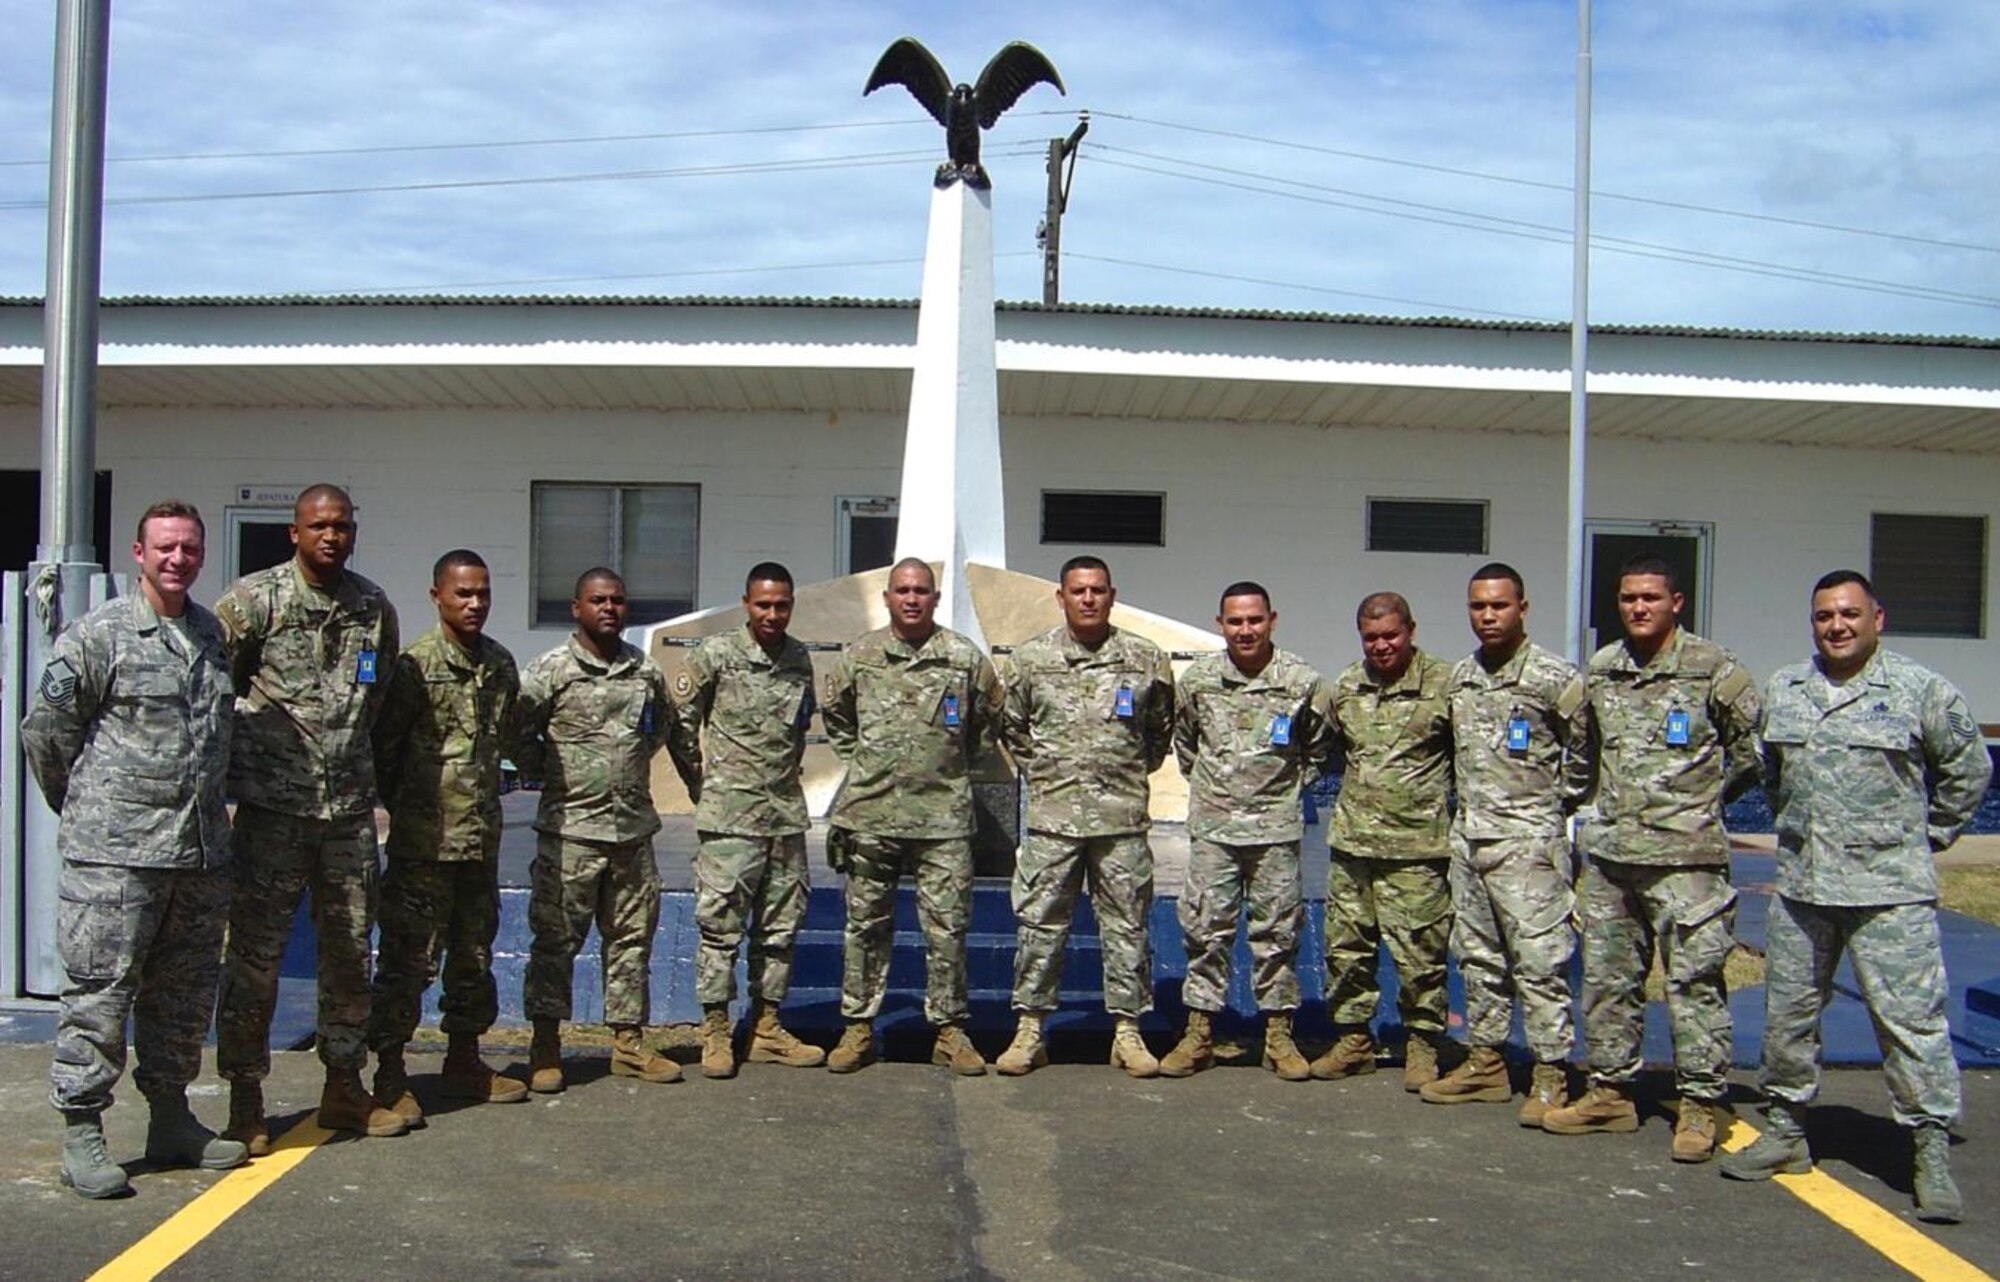 (Left) Master Sgt. Jeremy Jacobs, 12th Air Force (Air Forces Southern) Tactical Aircraft Manager, and Master Sgt. Roberto Vasquez, 12th Air Force (Air Forces Southern) A3/5 Superintendent, took part in the 20 day temporary duty assignment aimed at building partner capability pose for a photo with their Panamanian counterparts. 

